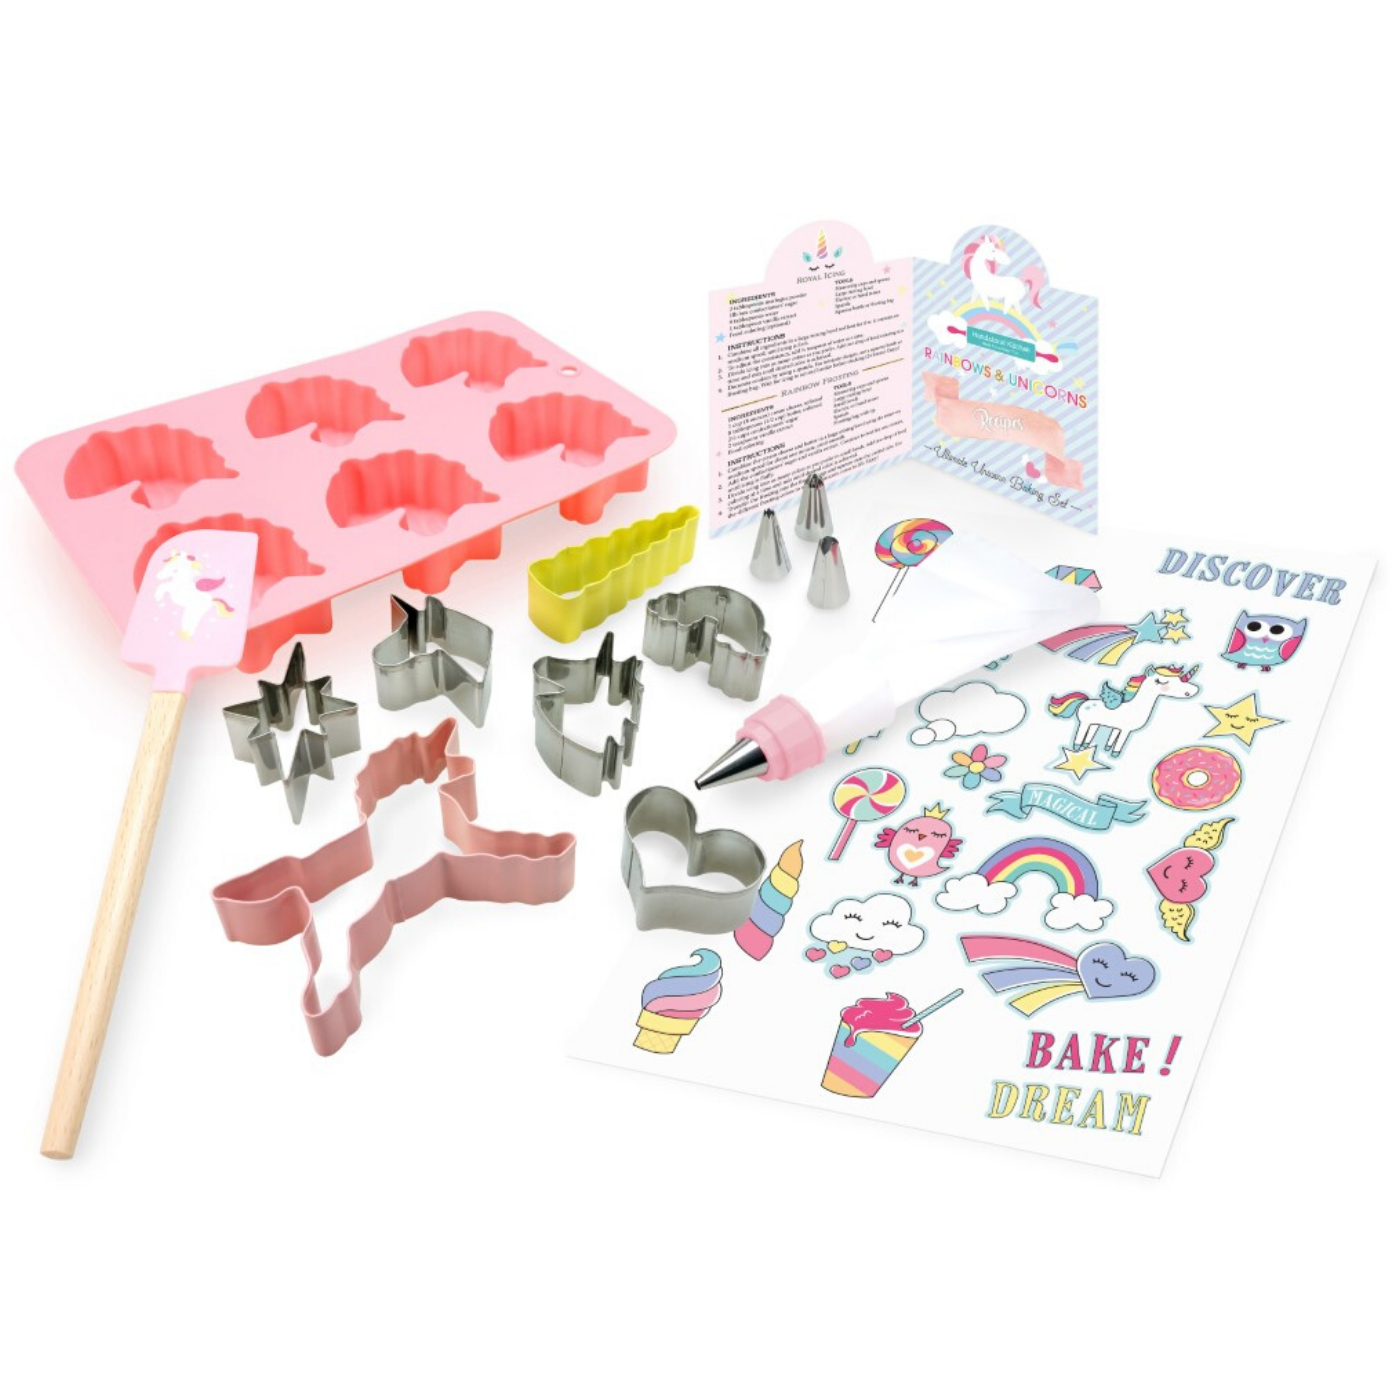 Out of box of Rainbows &amp; Unicorns Ultimate Baking Party Set. Includes: 2 large and 5 mini unicorn-themed stainless steel cookie cutters, 1 unicorn-shaped silicone cupcake mold, 1 silicone spatula, 1 frosting bag with coupler, ring and 3 tips, a sticker sheet and recipes.